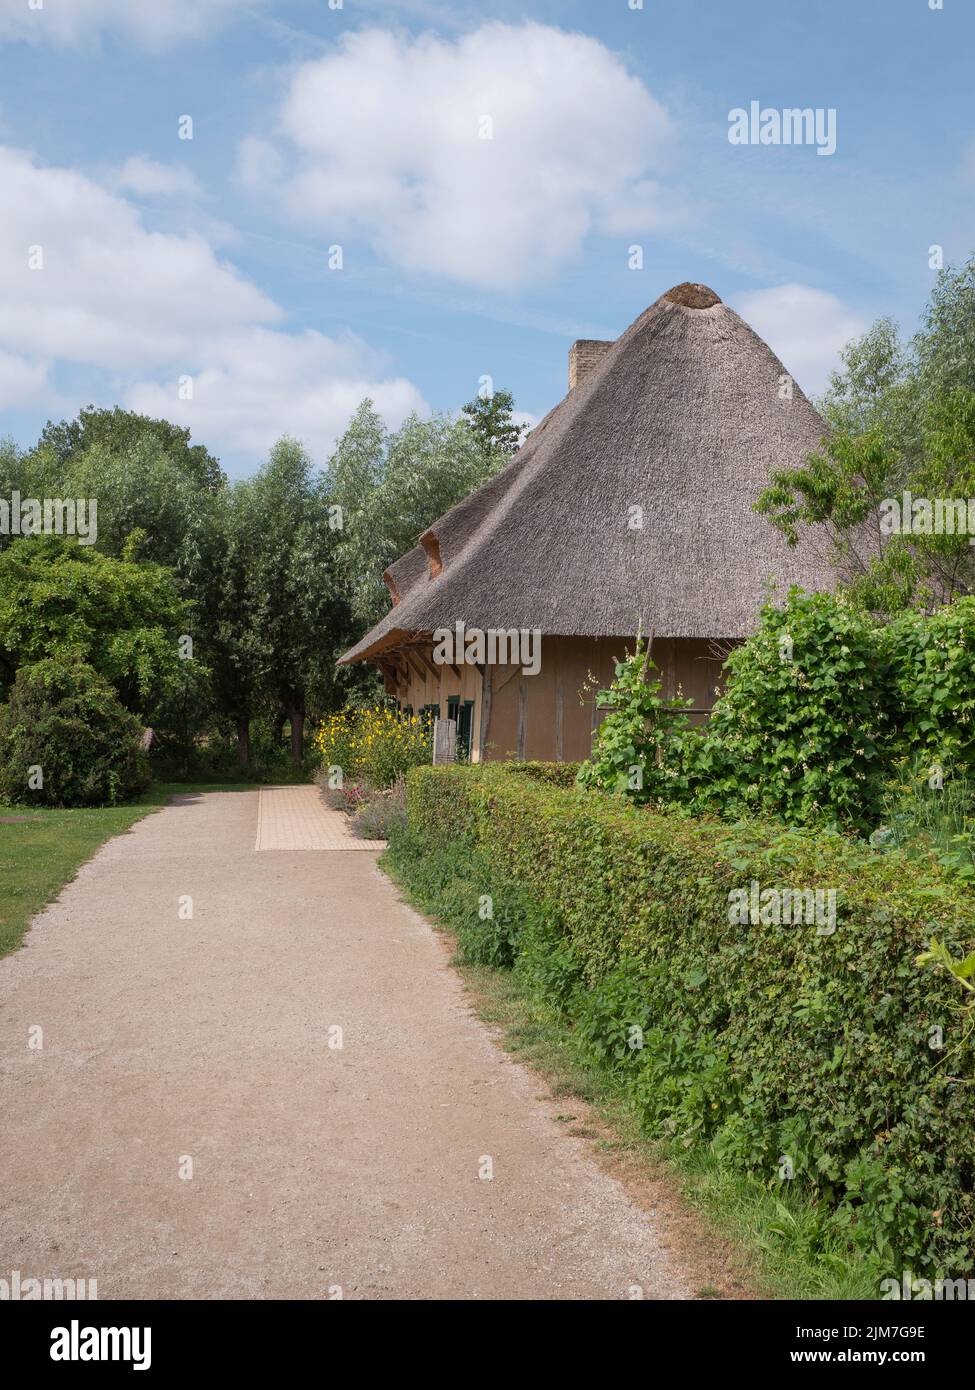 Dusty road to an old house with a large thatched roof from the province of West Flanders in Belgium located in Bokrijk Stock Photo